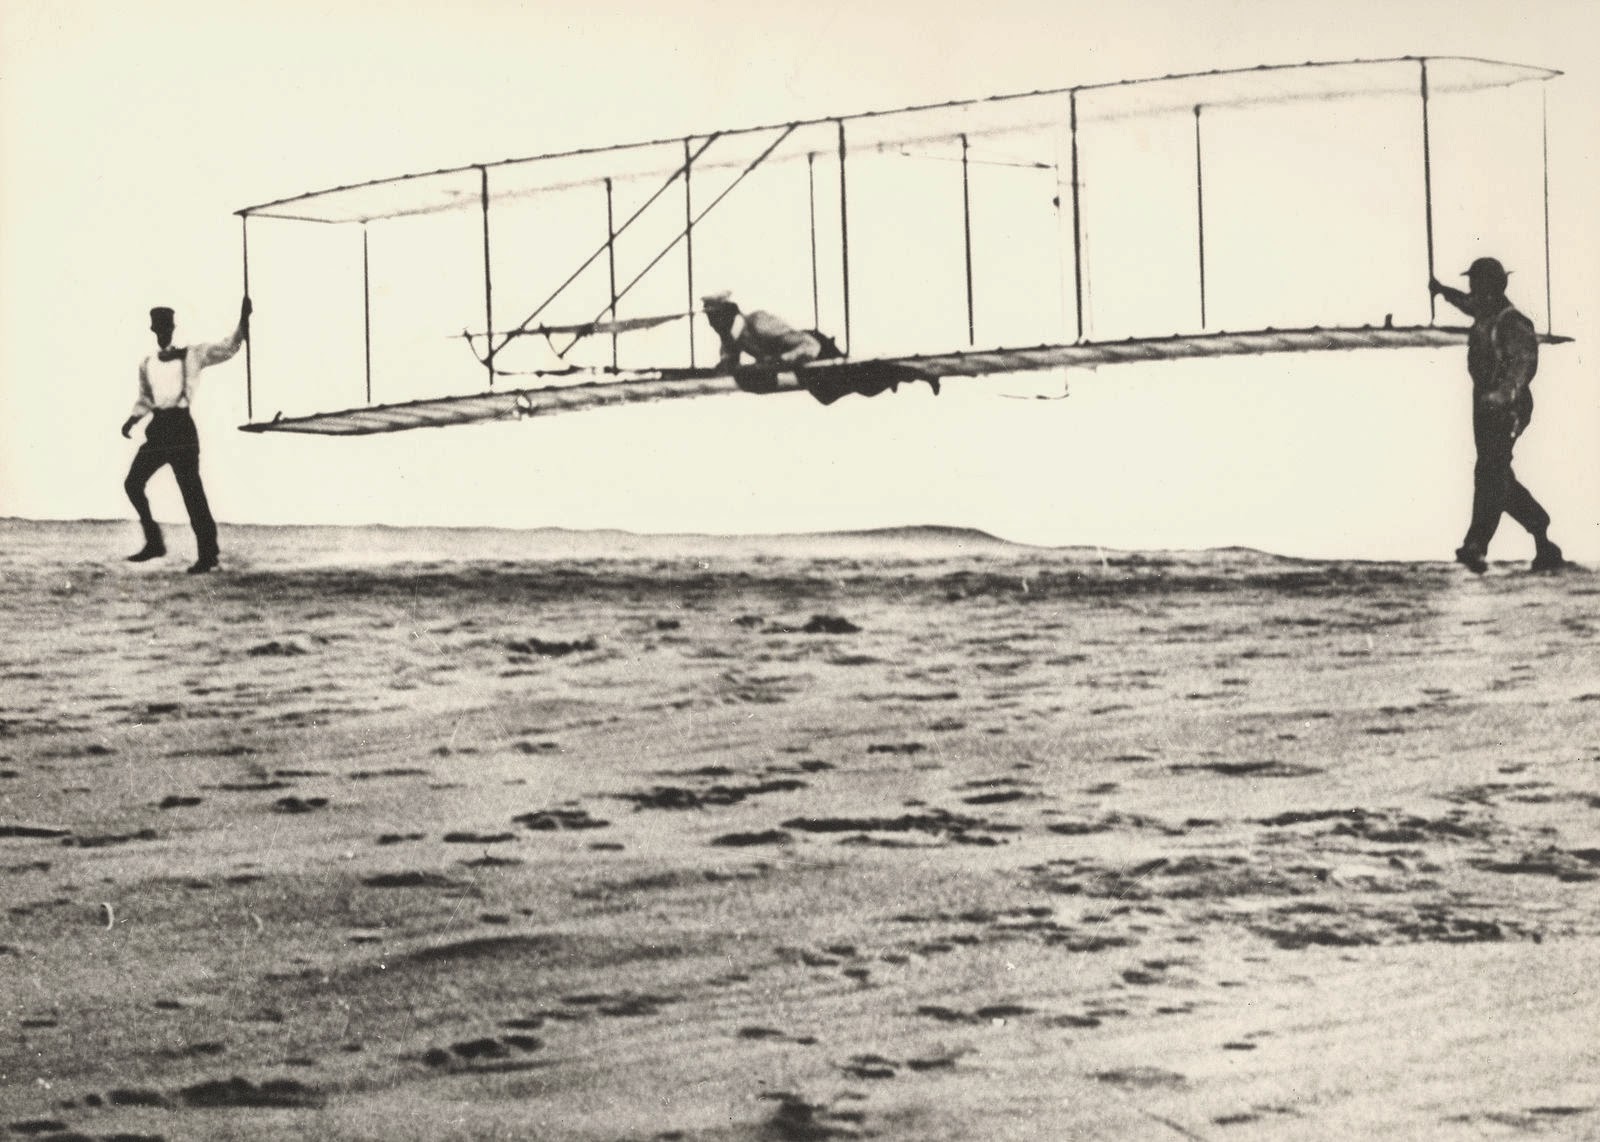 Historic photo of the Wrights’ third test glider being launched, with one man aboard and one to each side of the glider